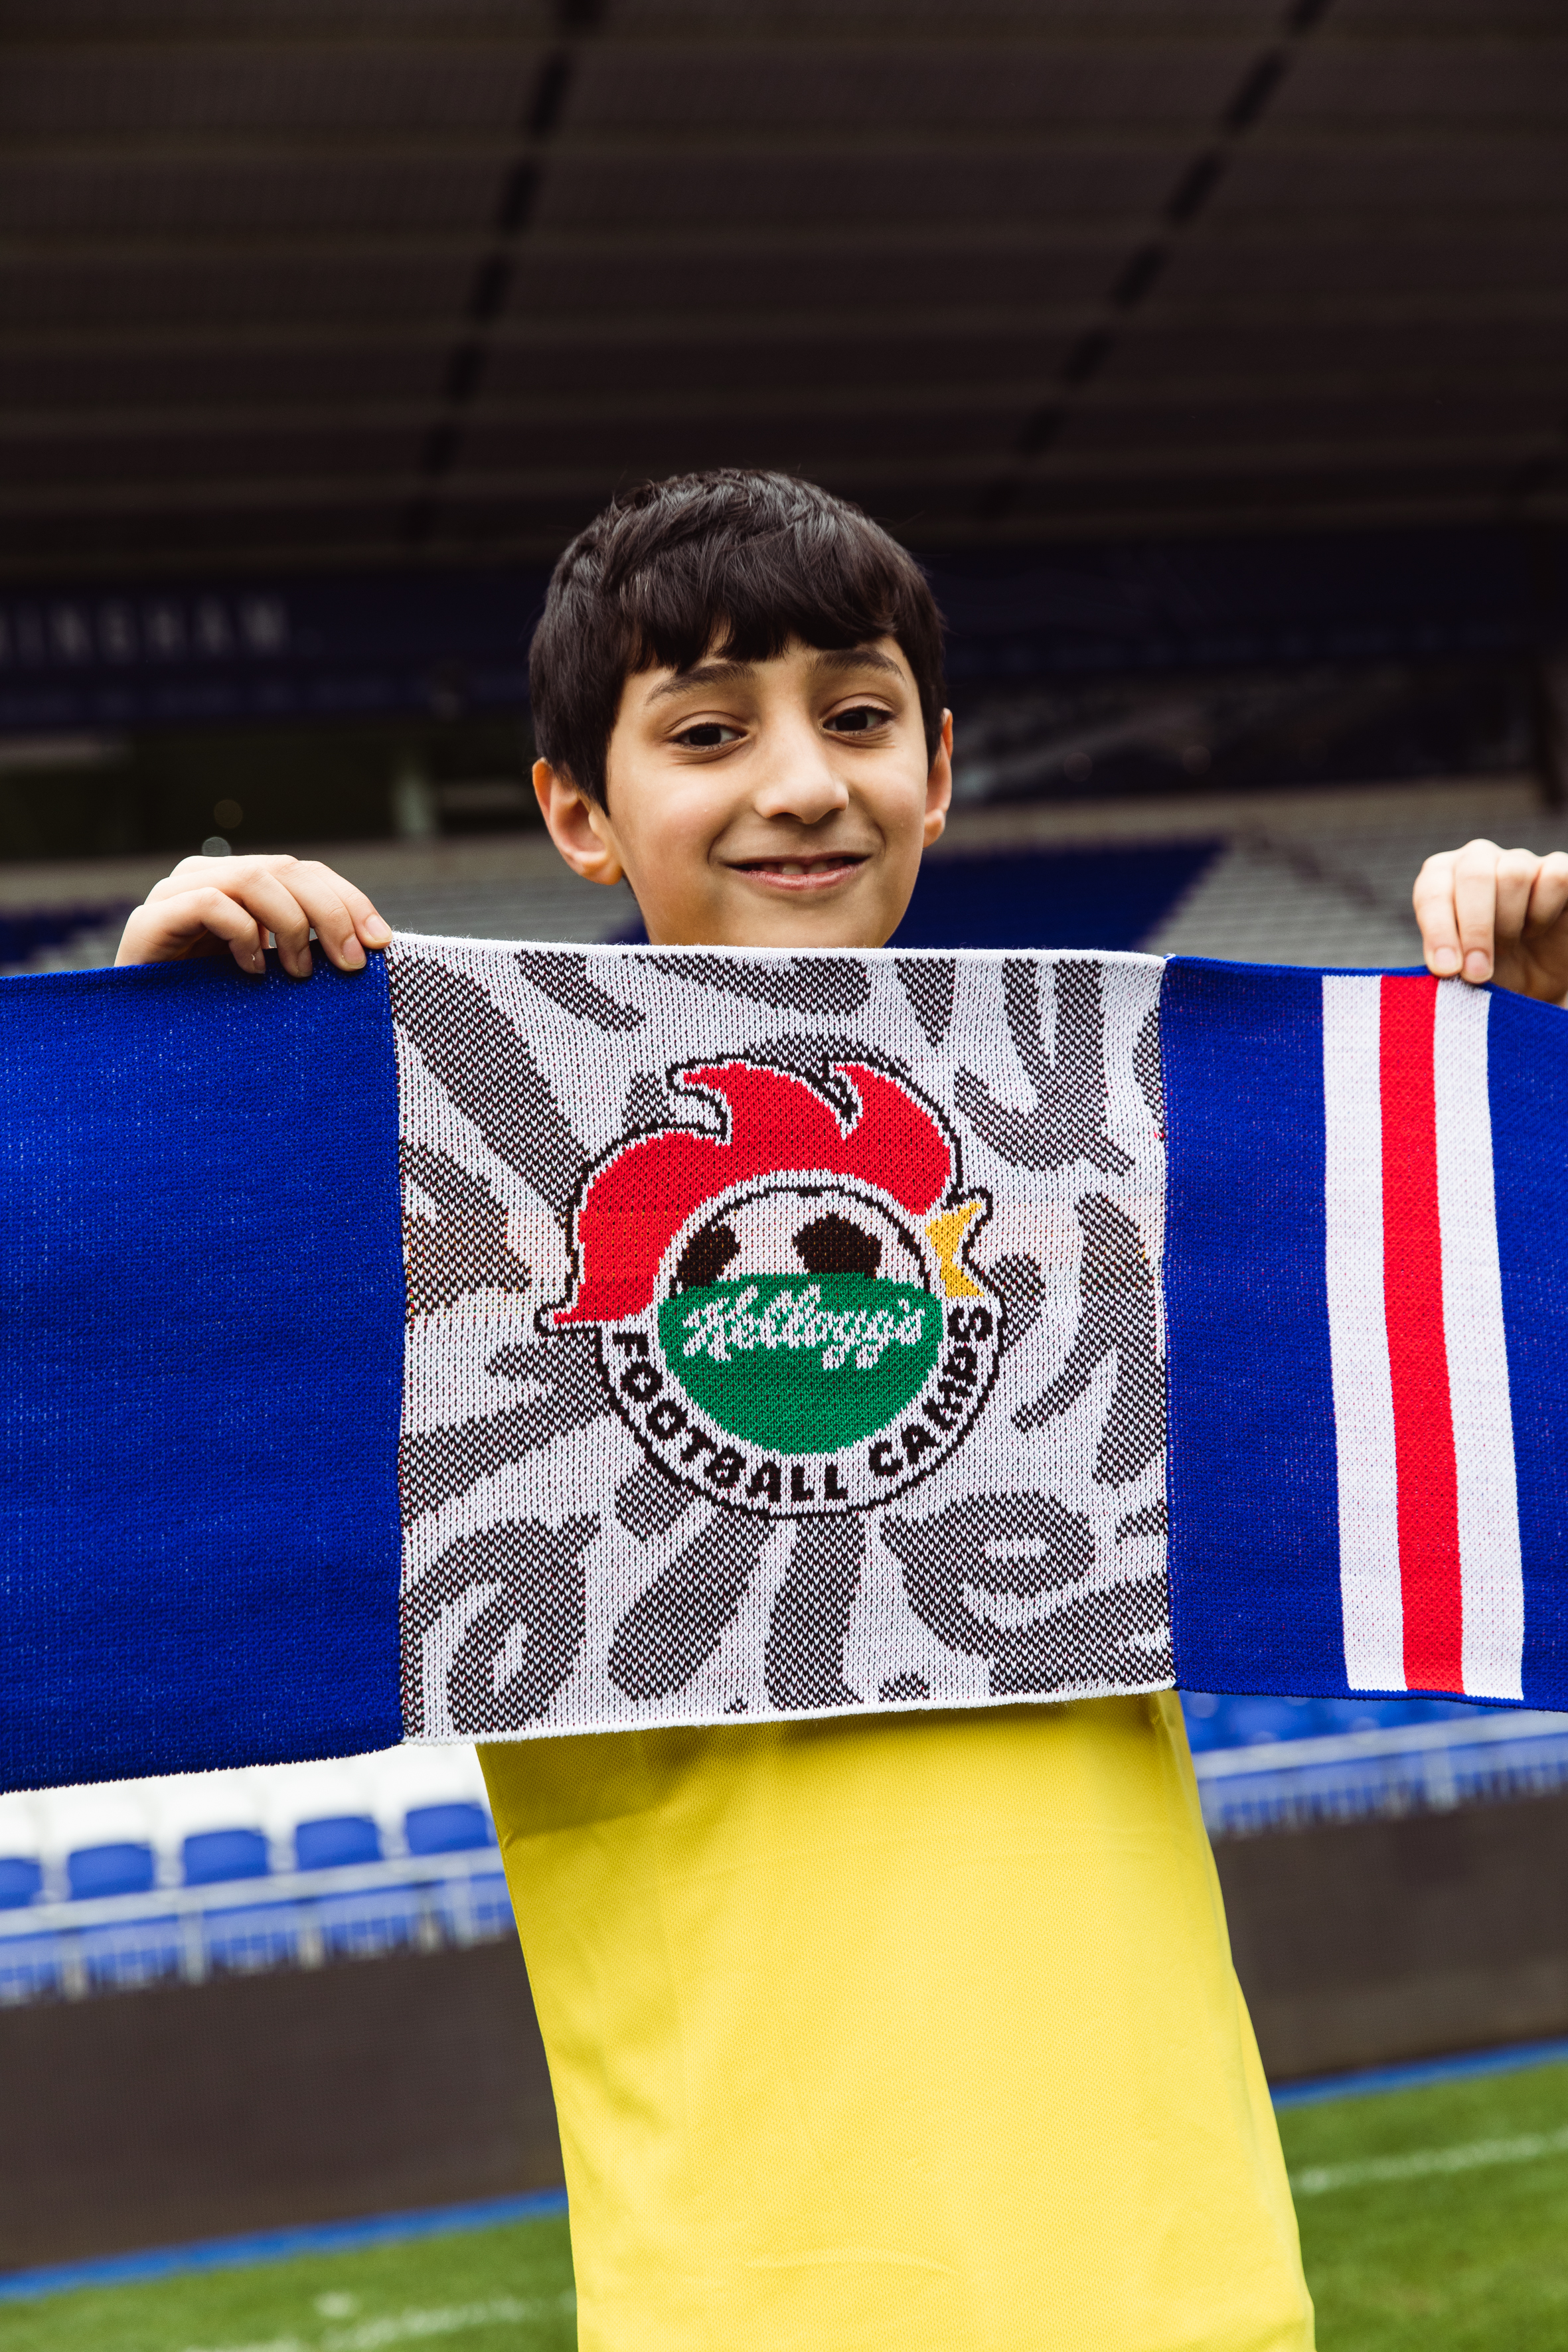 Child holding the middle section of scarf displaying Kelloggs Football Camp branding.